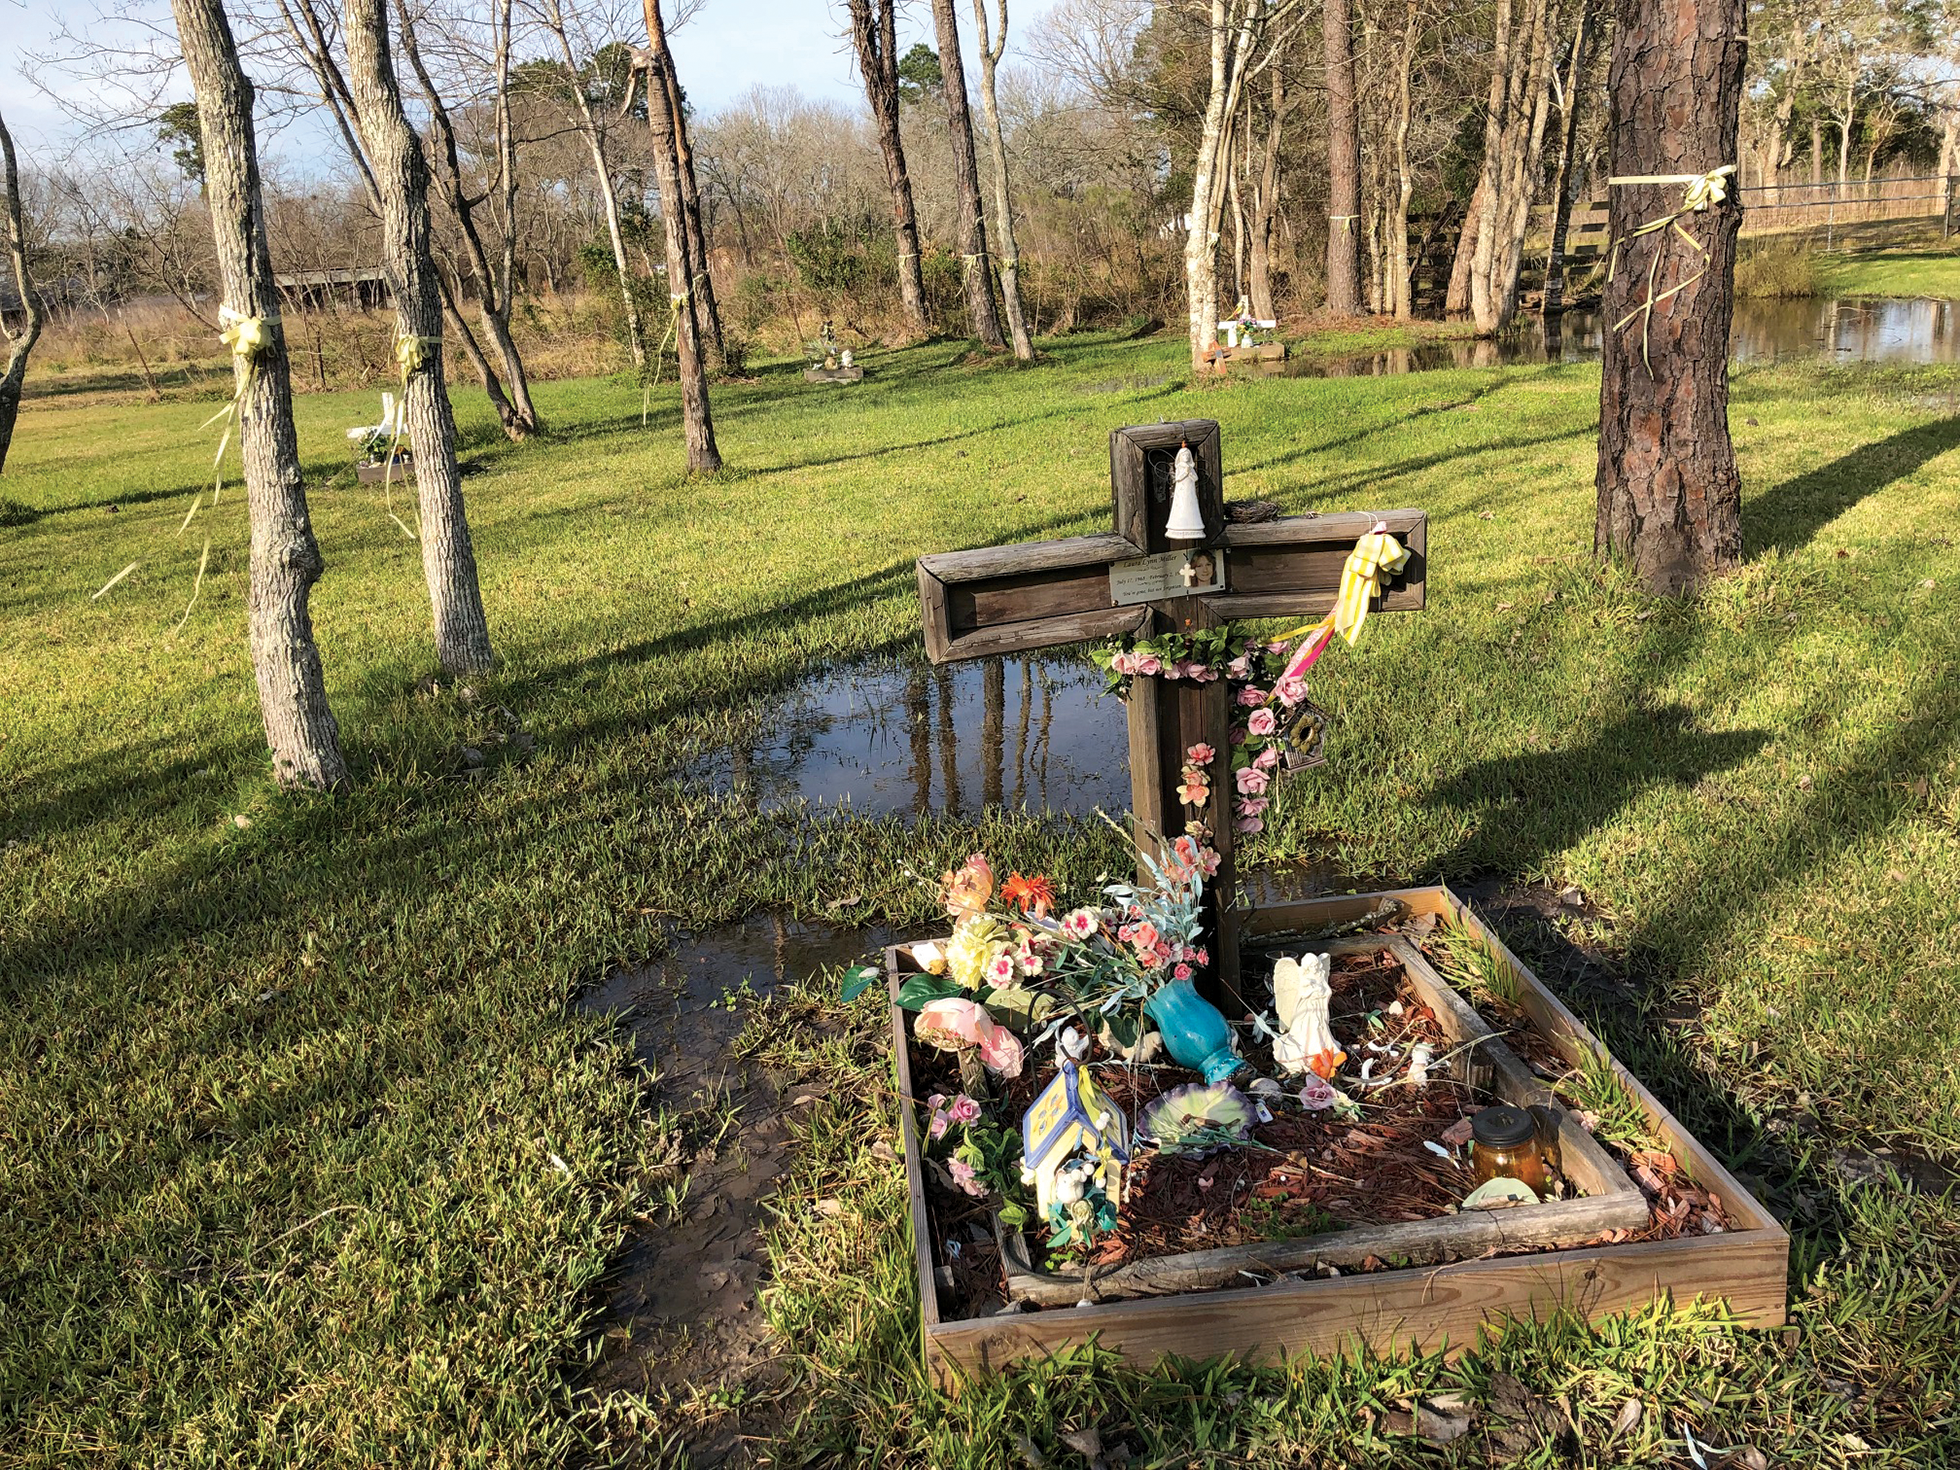 One of the monuments built for the Killing Fields murder victims in a grove of trees off Calder Drive in League City, near where their bodies were found.